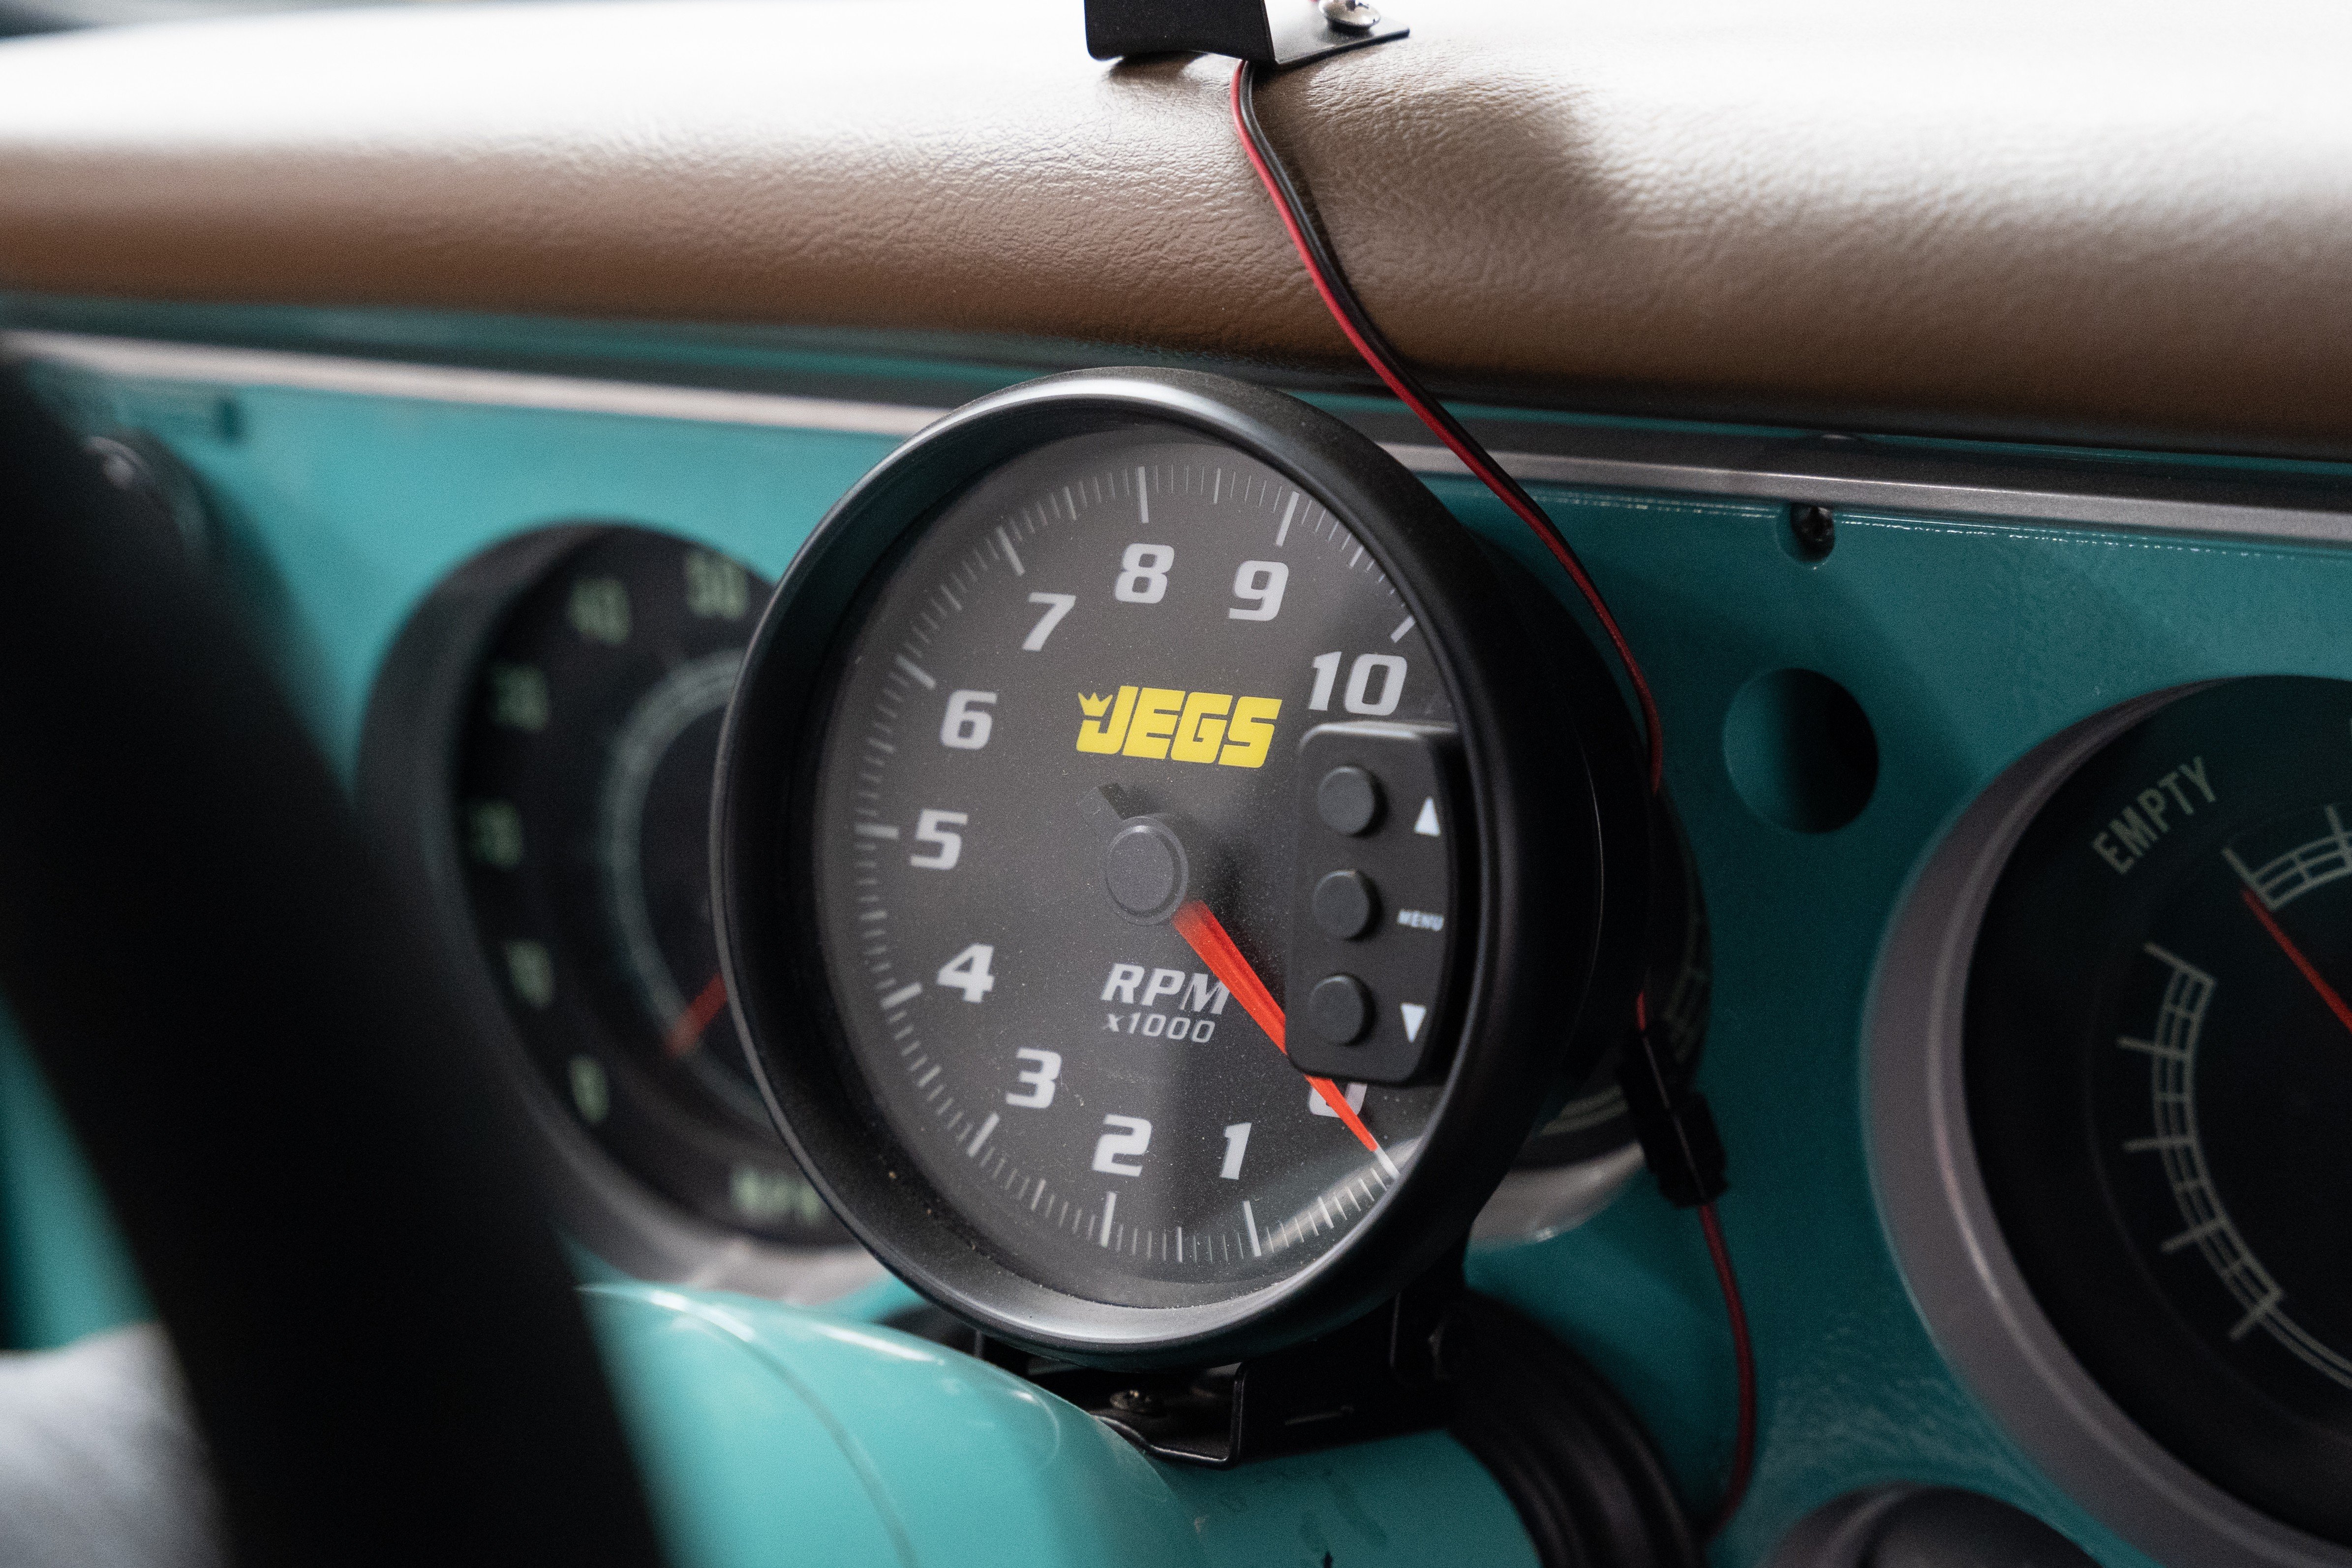 Tachometer in a Pro Street modified 1968 Chevrolet C10 pickup.